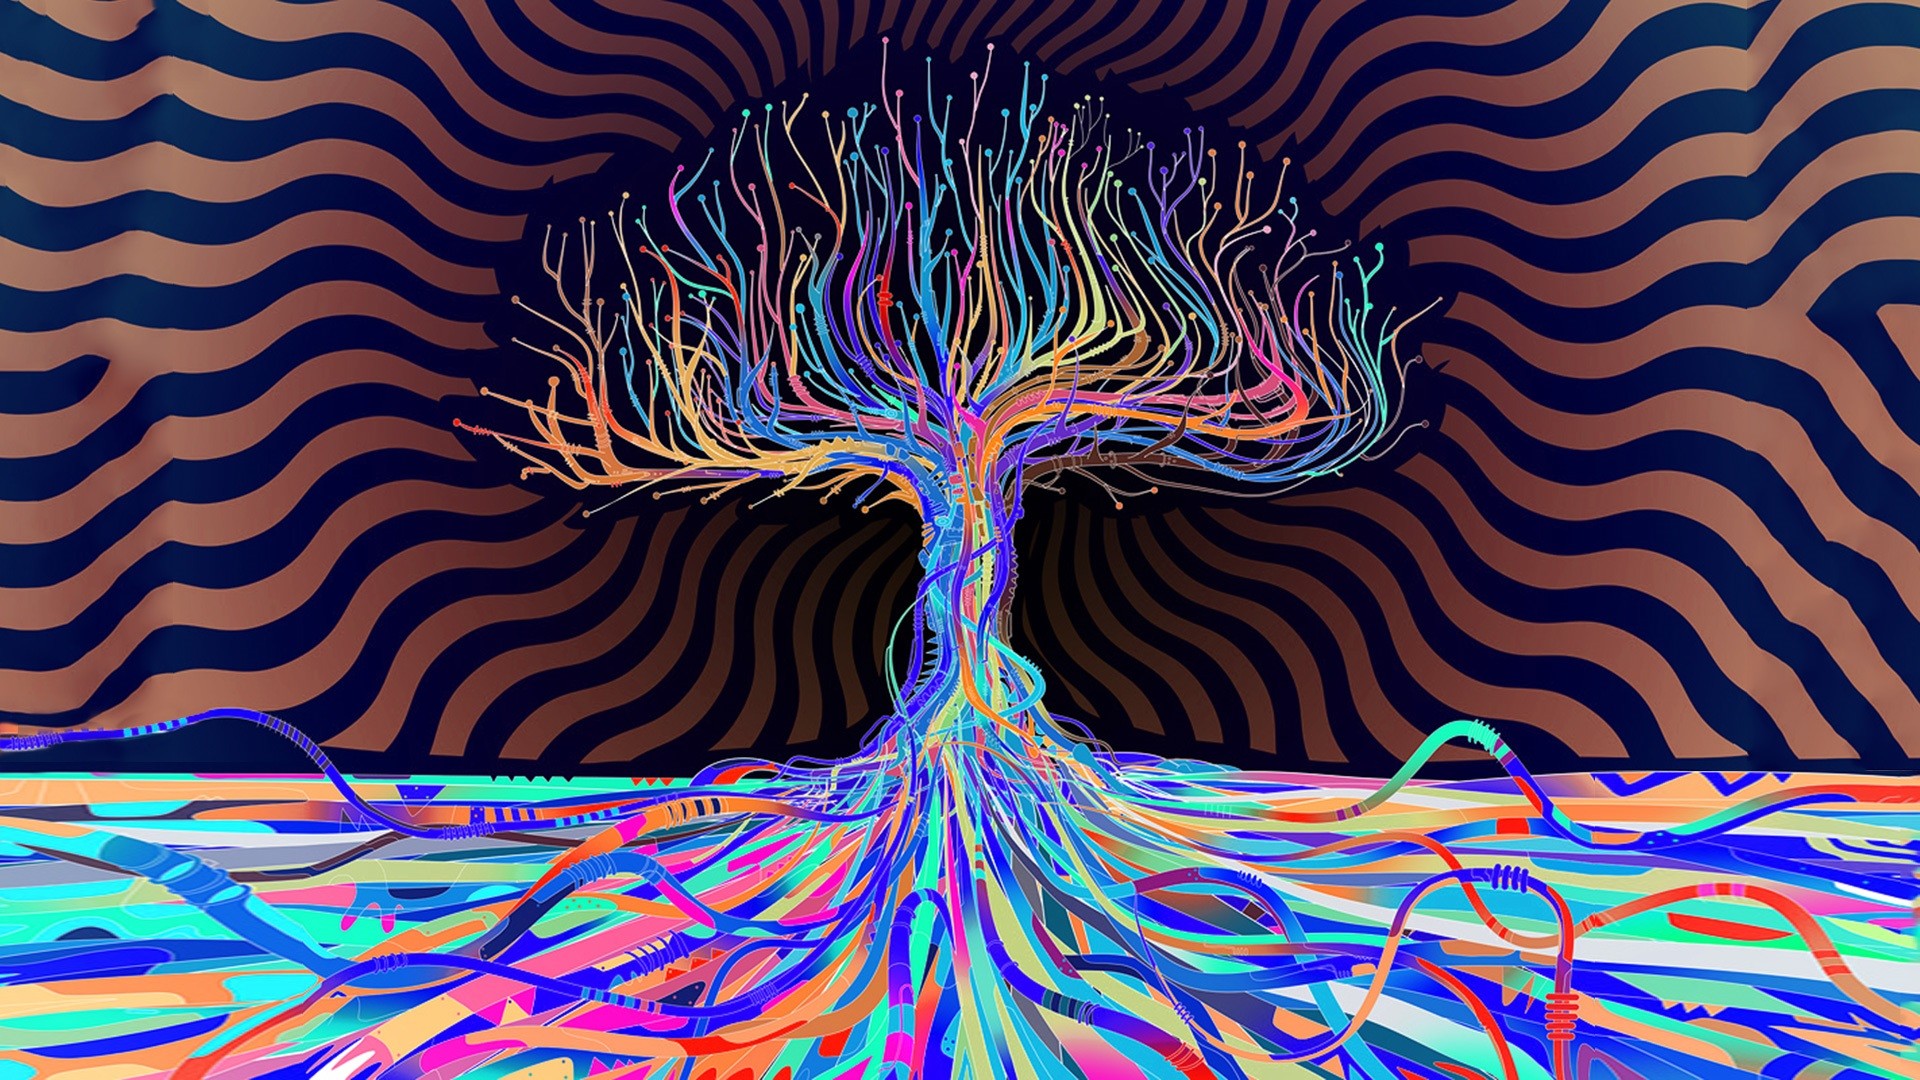 1920x1080 Psychedelic HD Wallpapers Wallpaper | HD Wallpapers | Pinterest |  Psychedelic, Hd wallpaper and Wallpaper